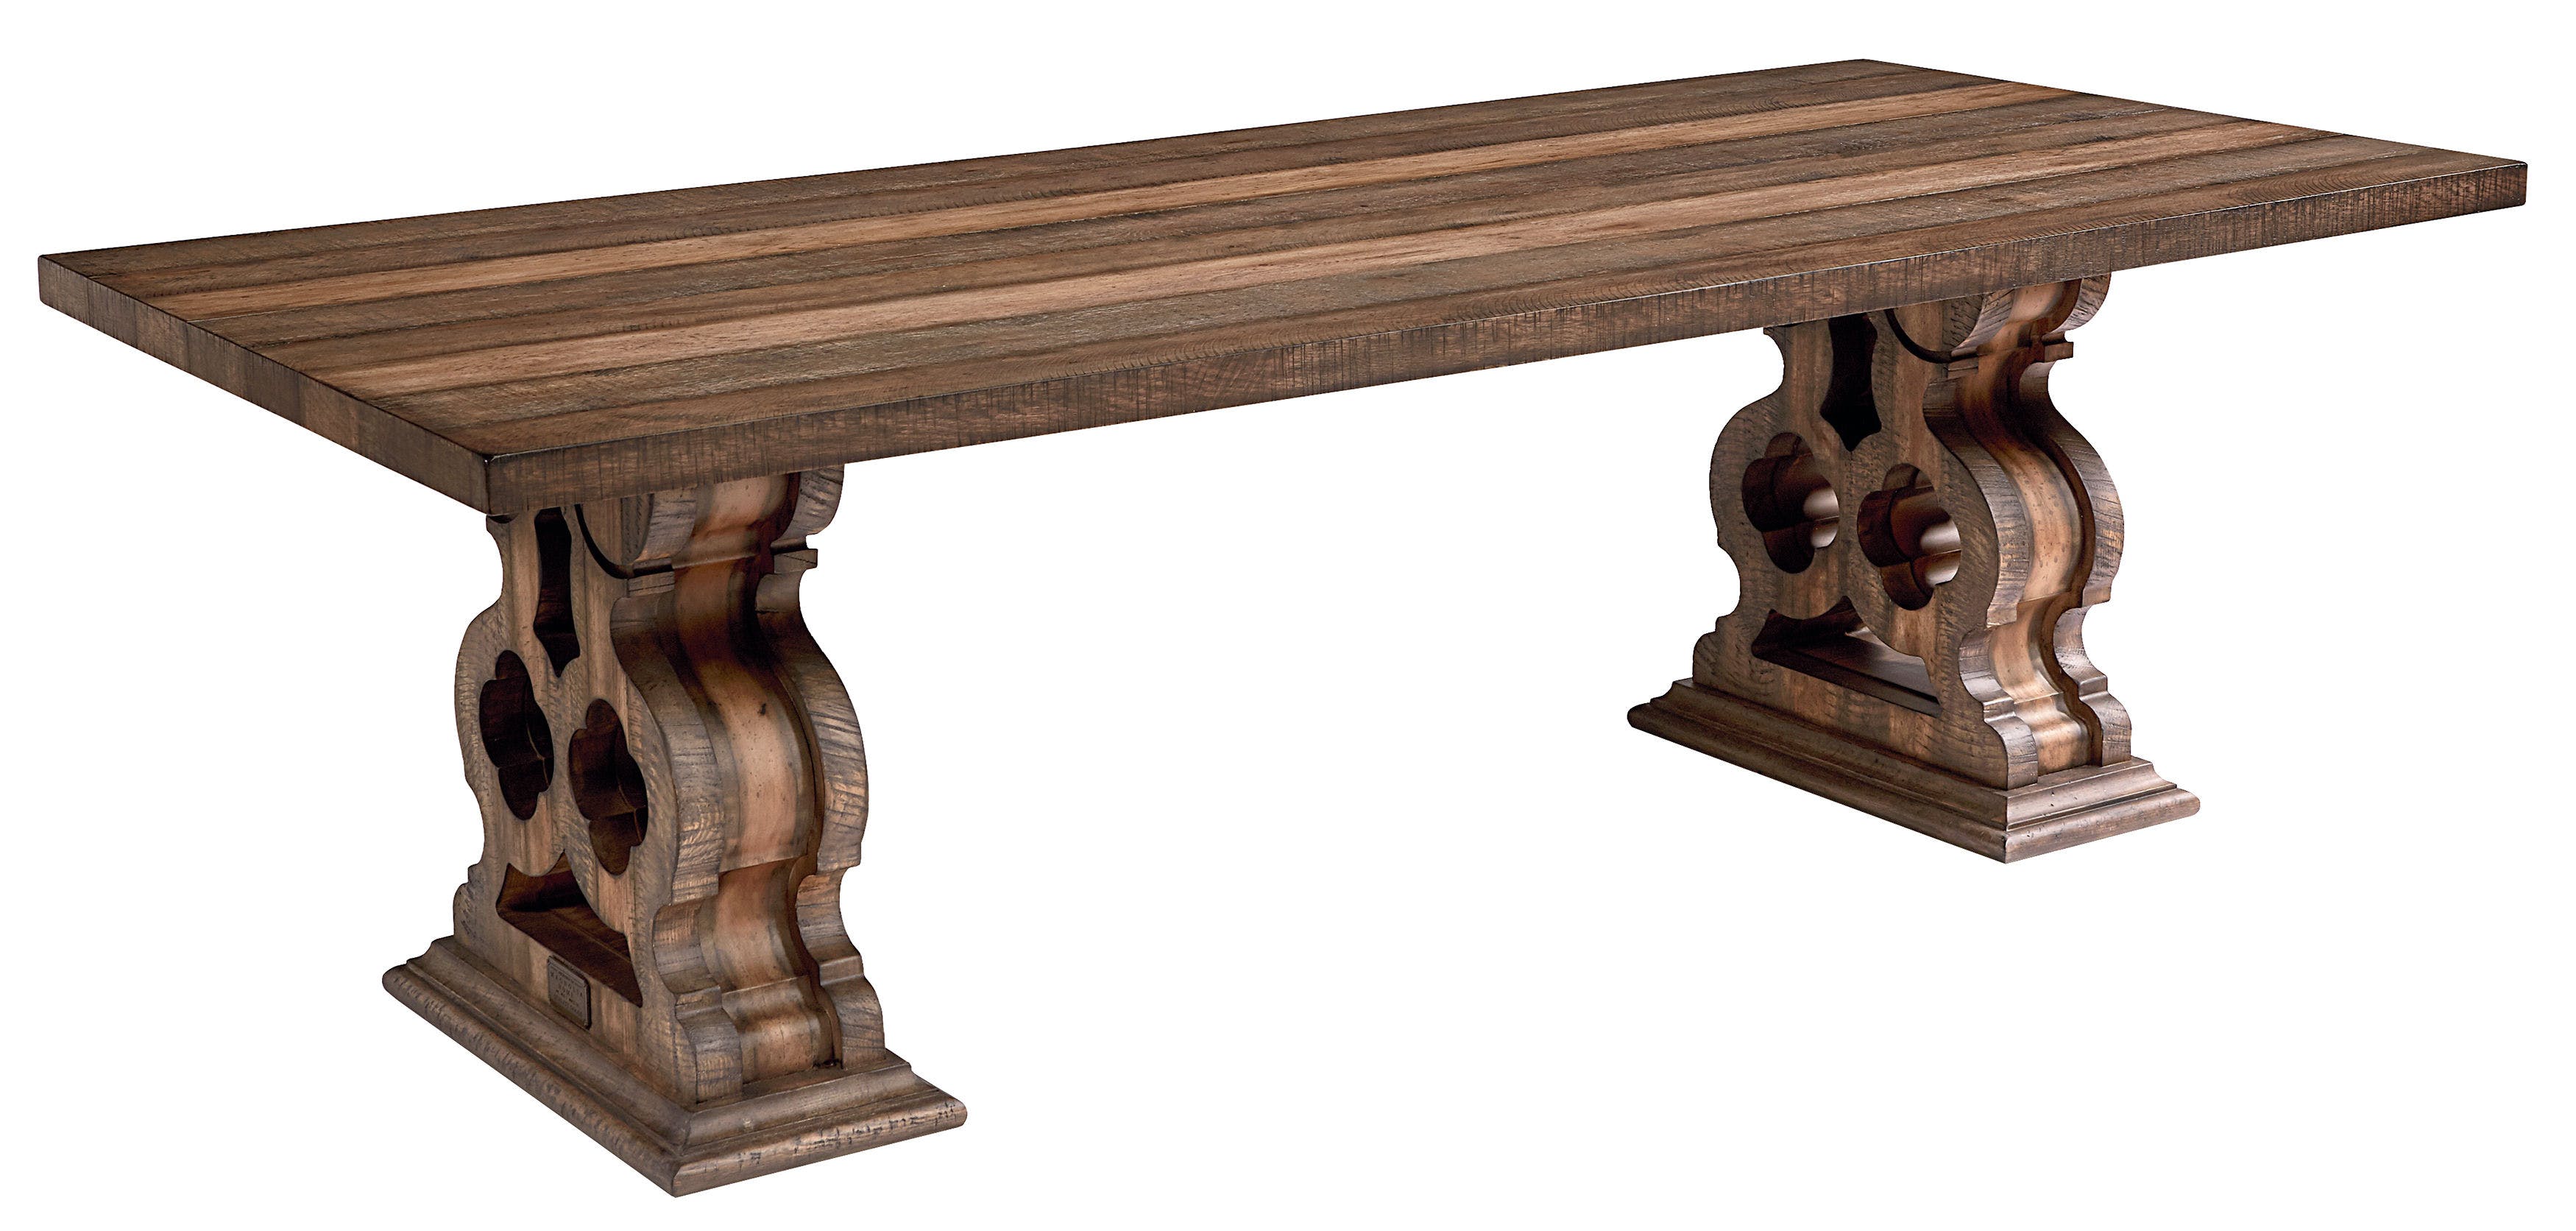 Pedestal Dining Room Table For 6-8 People